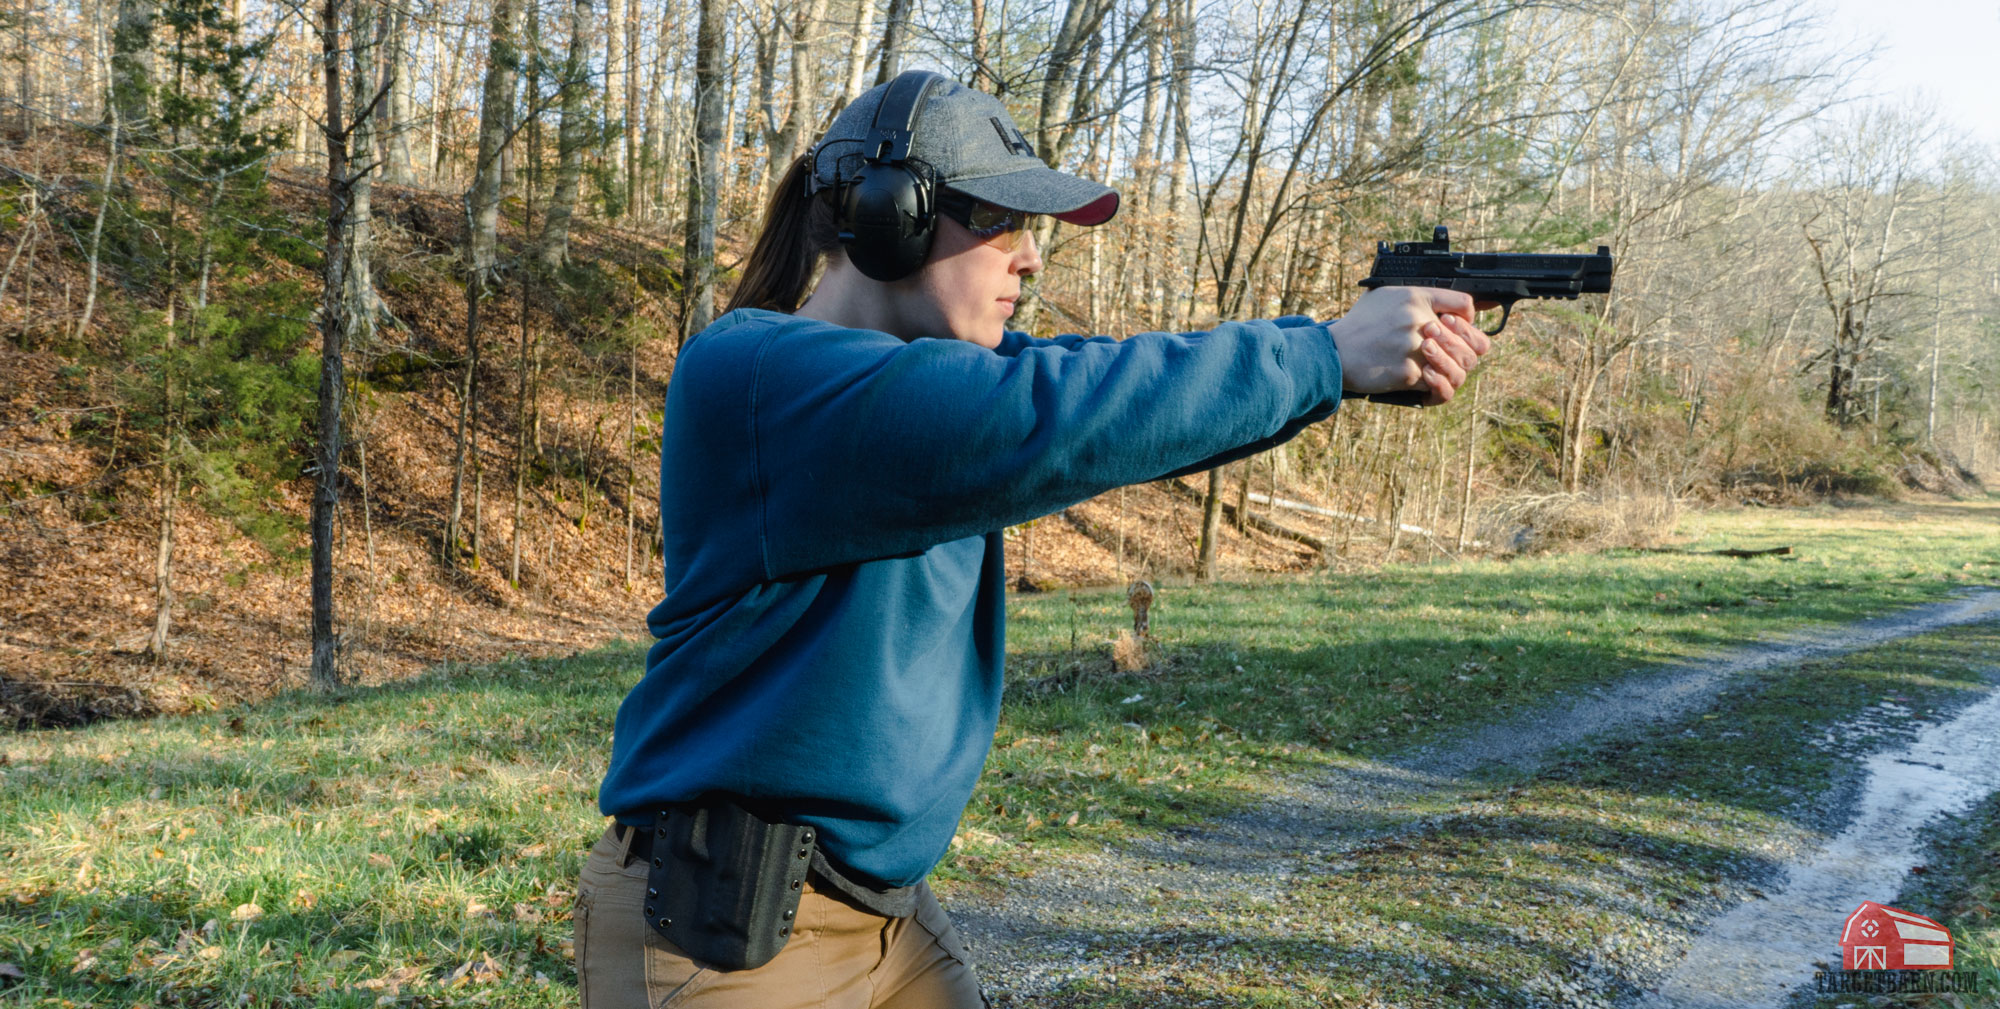 the author shooting a pistol at an outdoor range wearing proper range clothes including a hat, eye protection, ear protection and a high-cut shirt